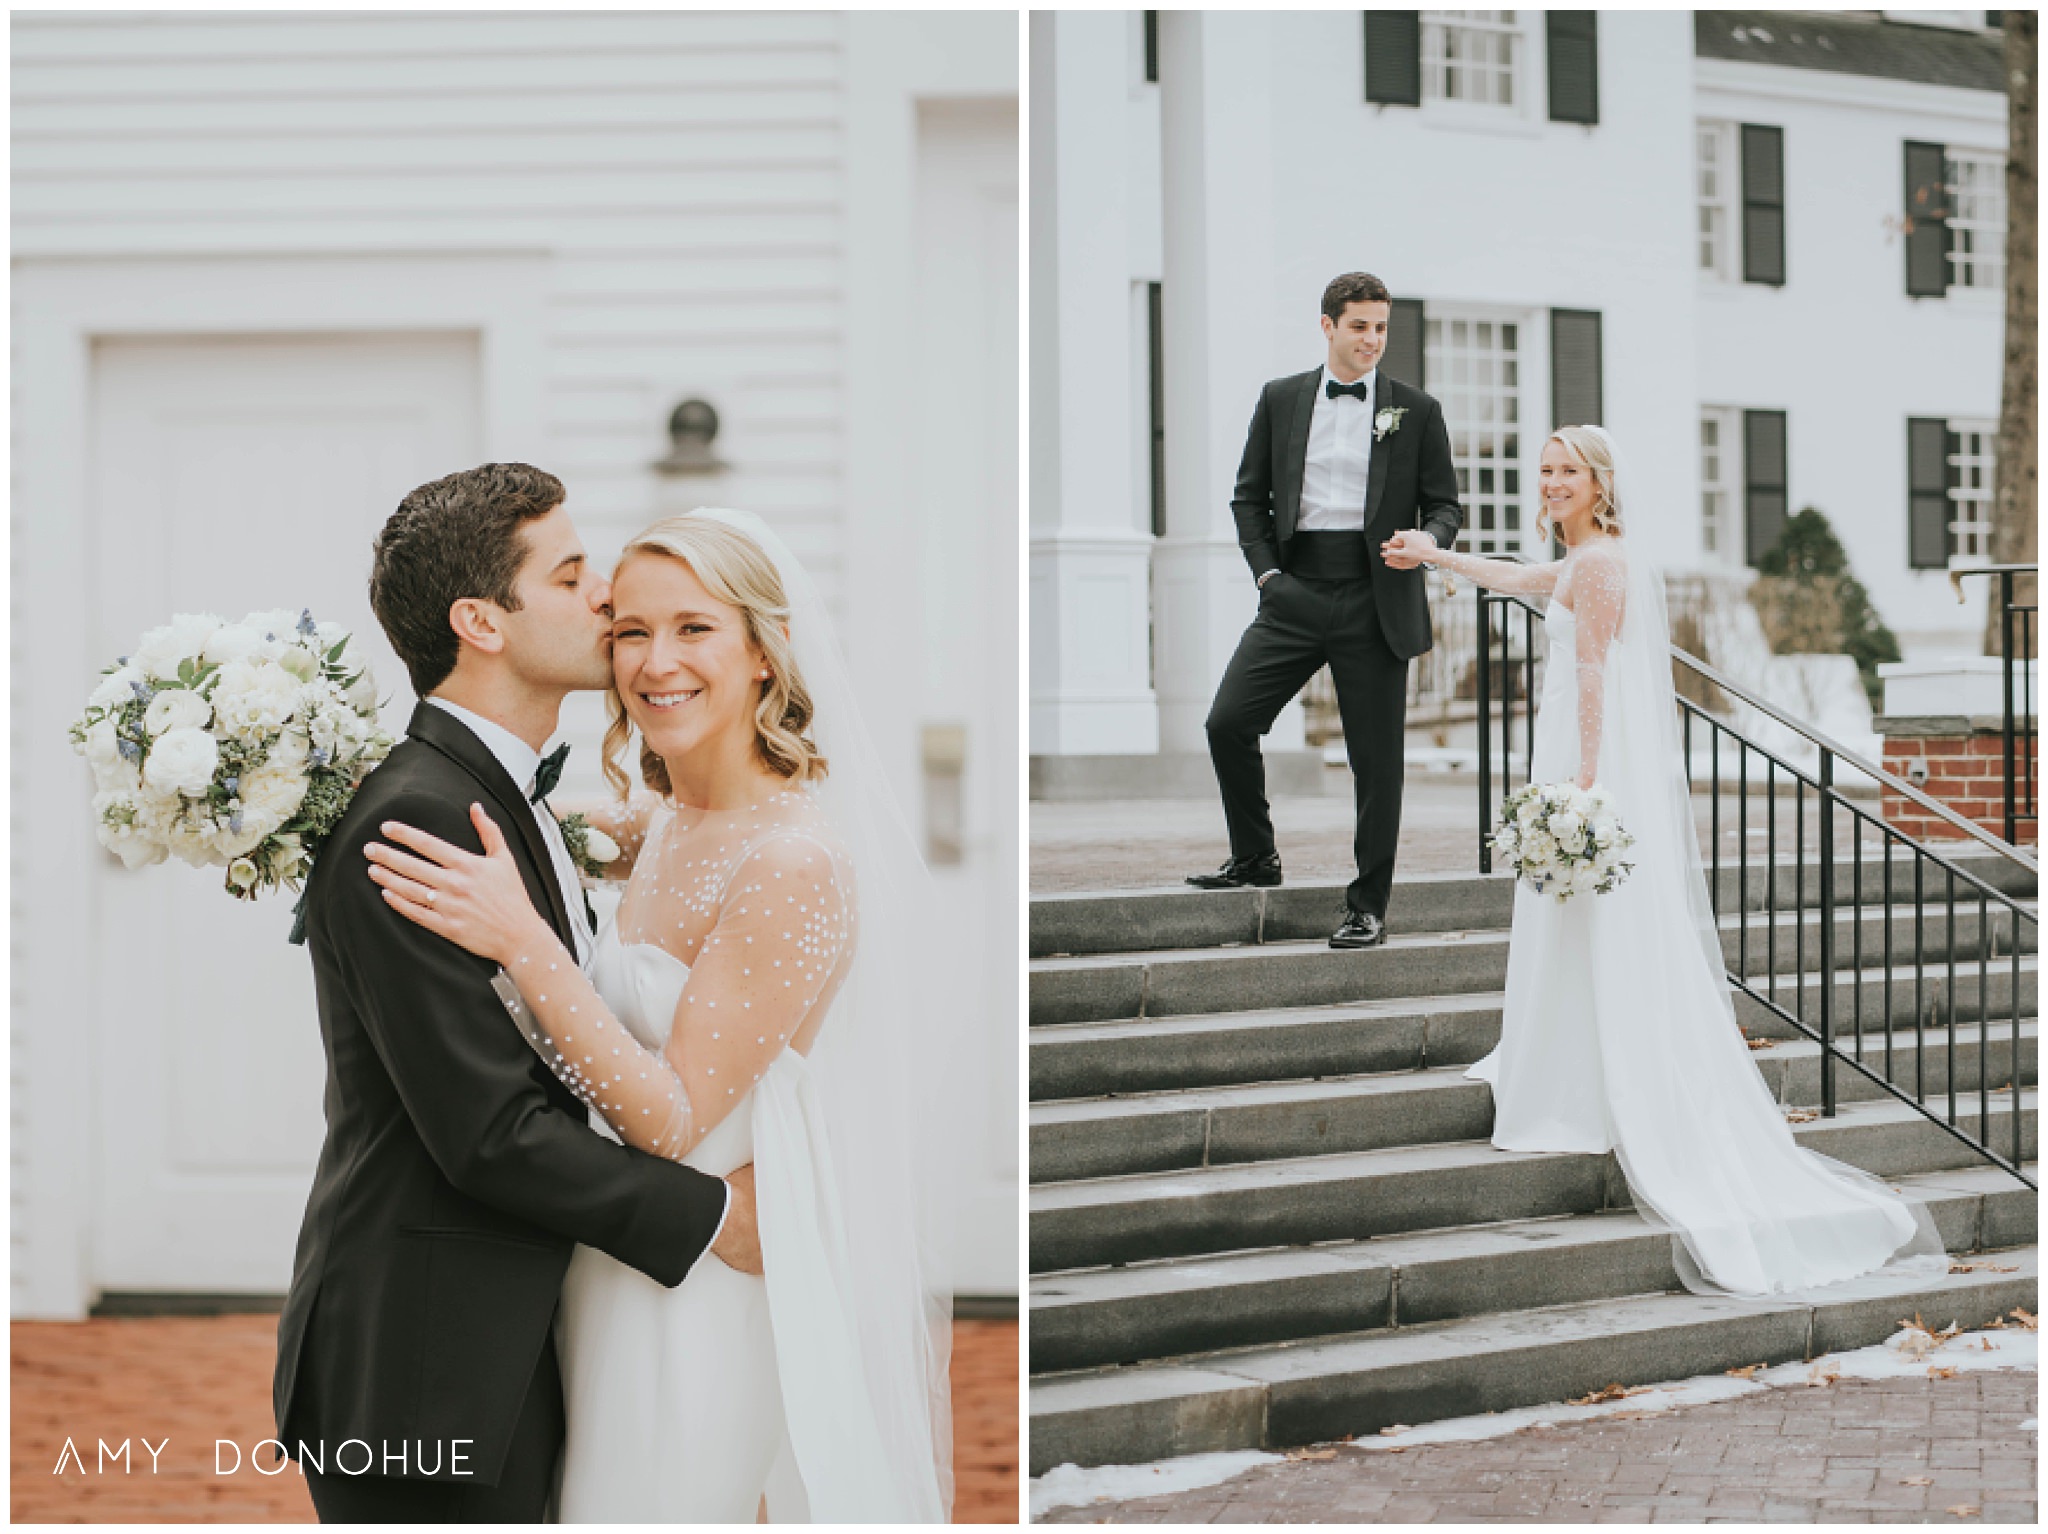 Bride and Groom Portraits | First Look | Vermont Wedding Photographer | © Amy Donohue Photography